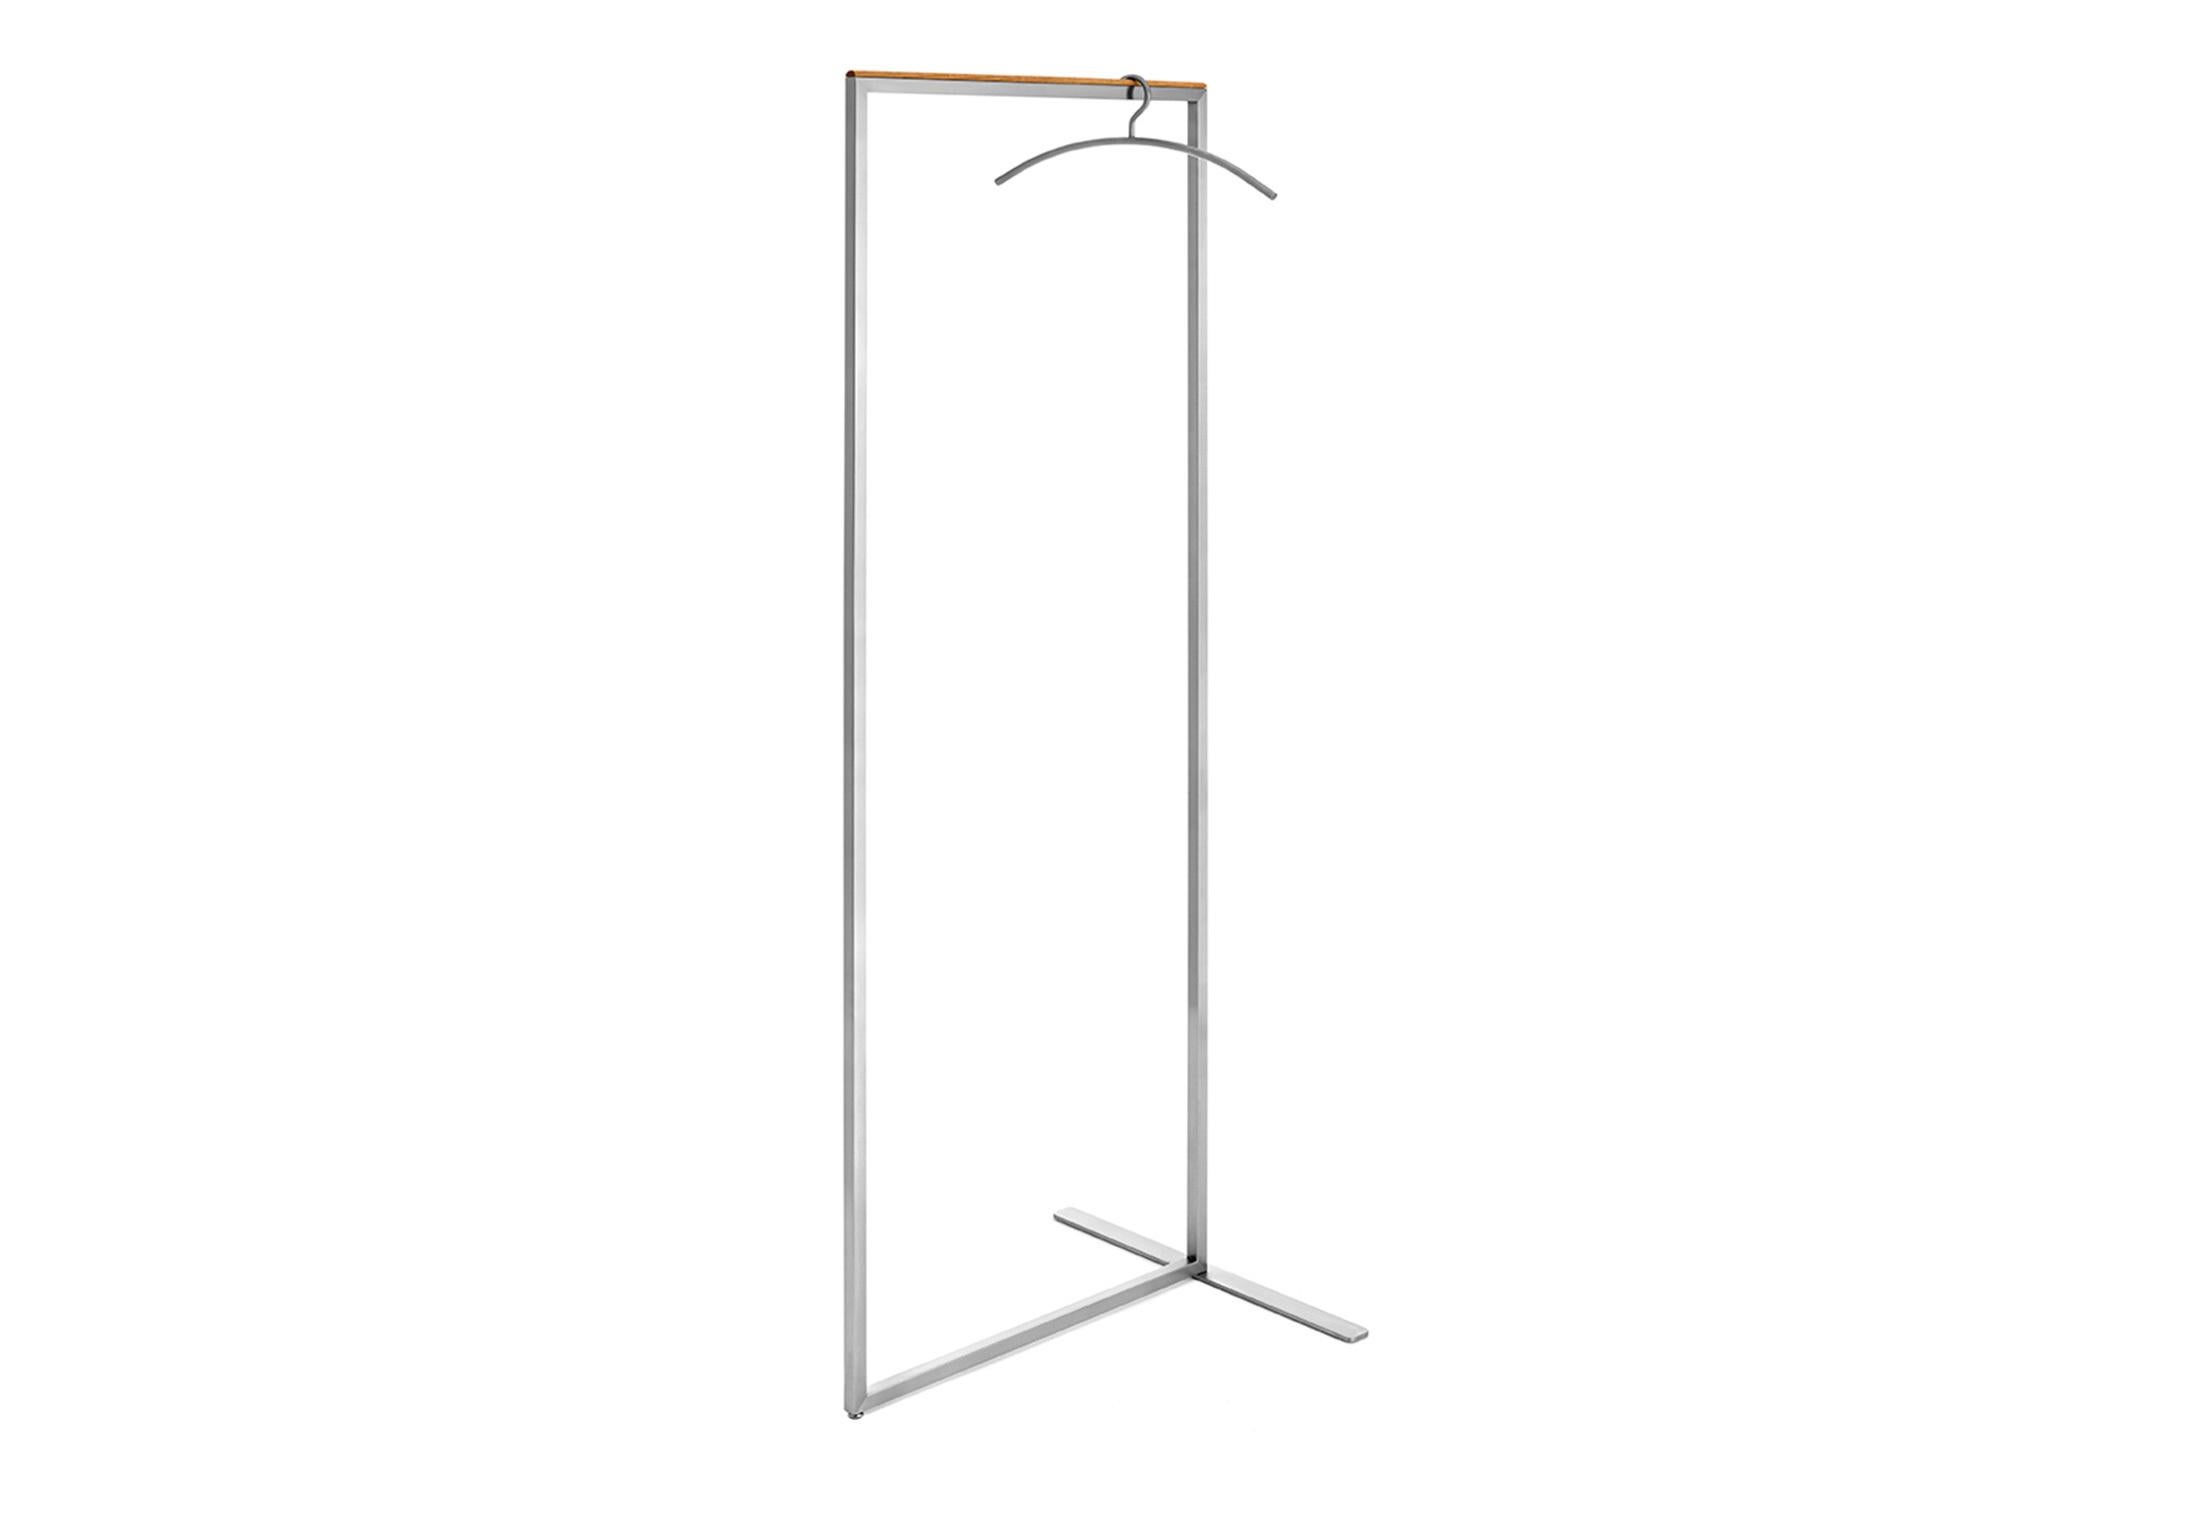 Interesting spaces. The Skid line is all about functional elegance. It consists of a purist coat Stand in two widths and a range of variants. The metal frame is finished in brushed stainless steel or powder-coated in slate black and topped with a